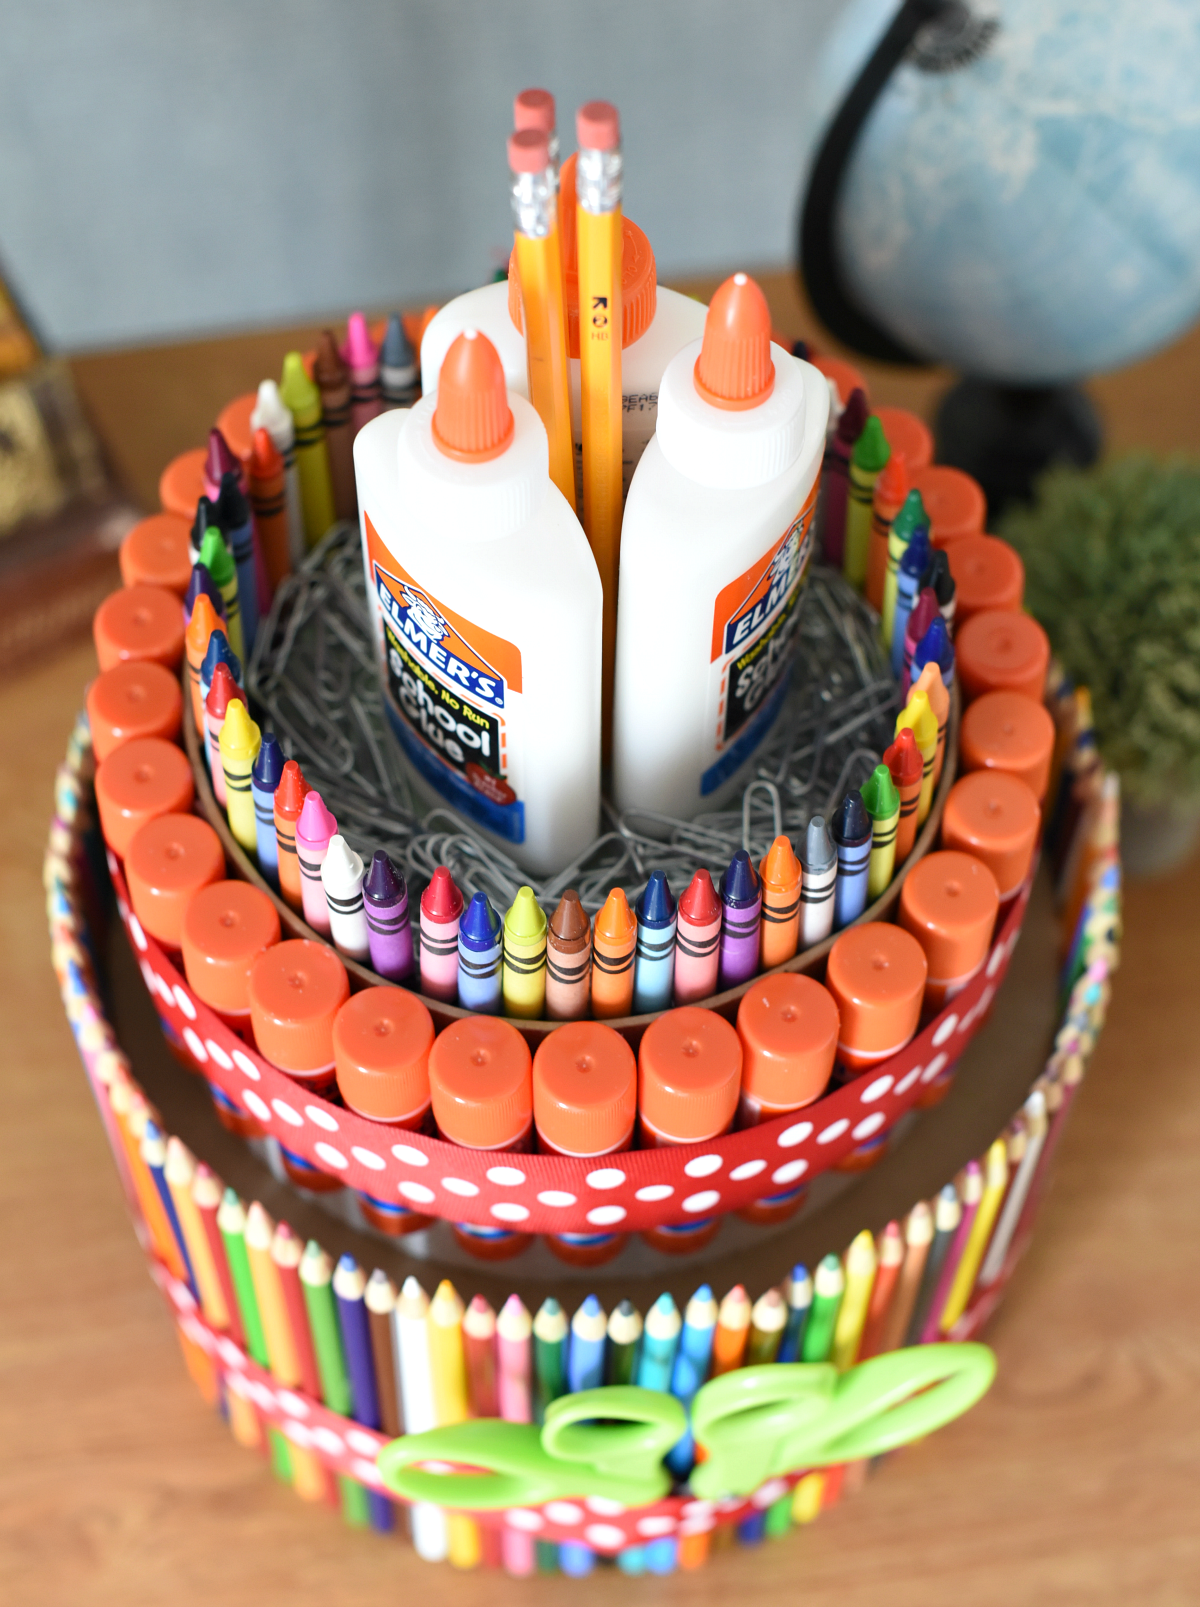 How to make a school supply cake